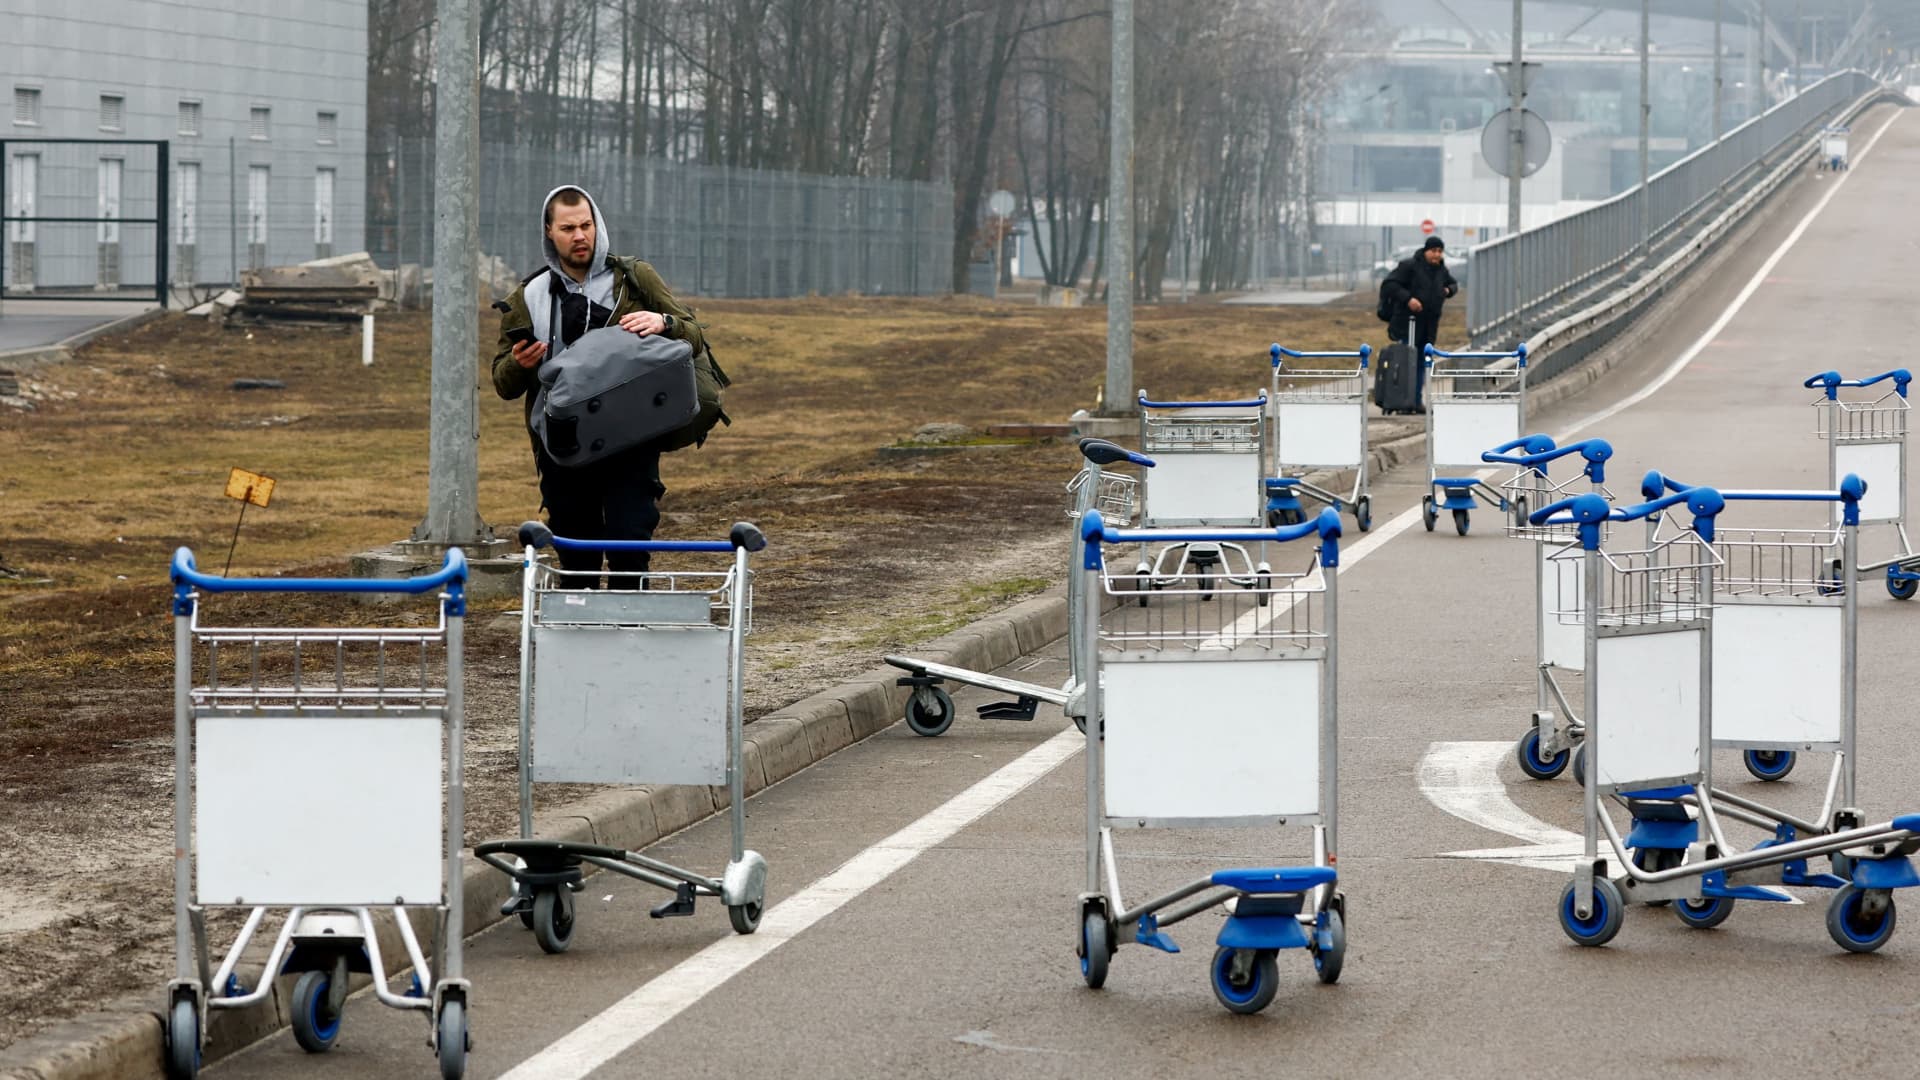 A person walks past luggage carts at Boryspil International Airport after Russian President Vladimir Putin authorized a military operation in eastern Ukraine, February 24, 2022.